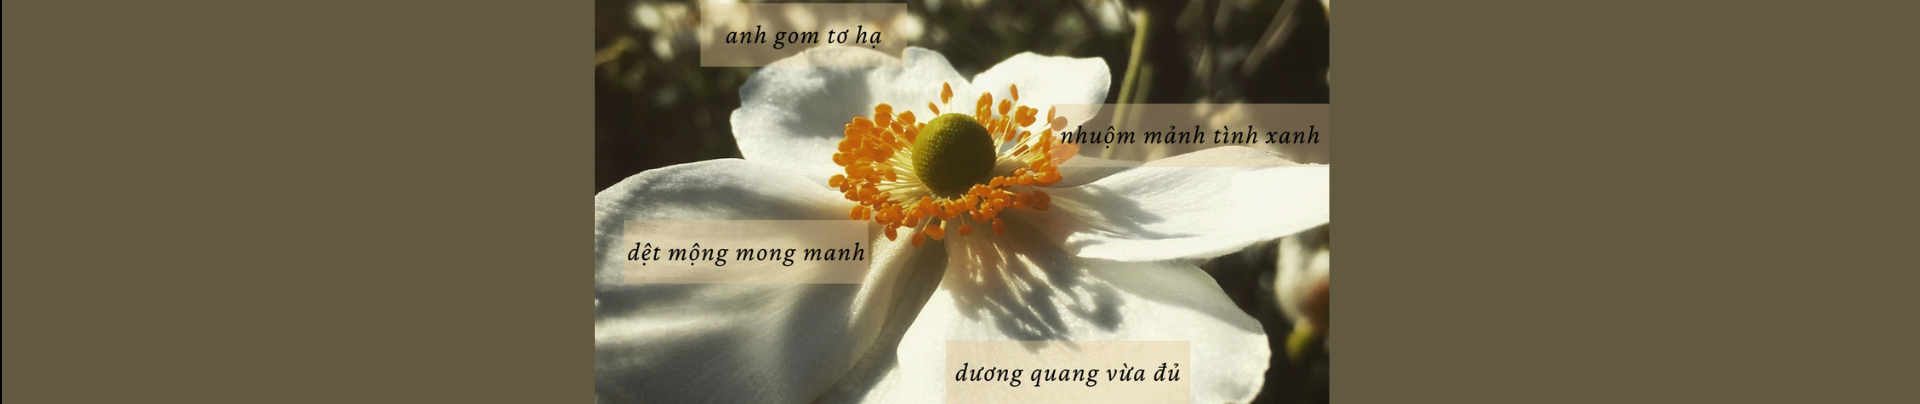 Dung Nguyen's profile banner